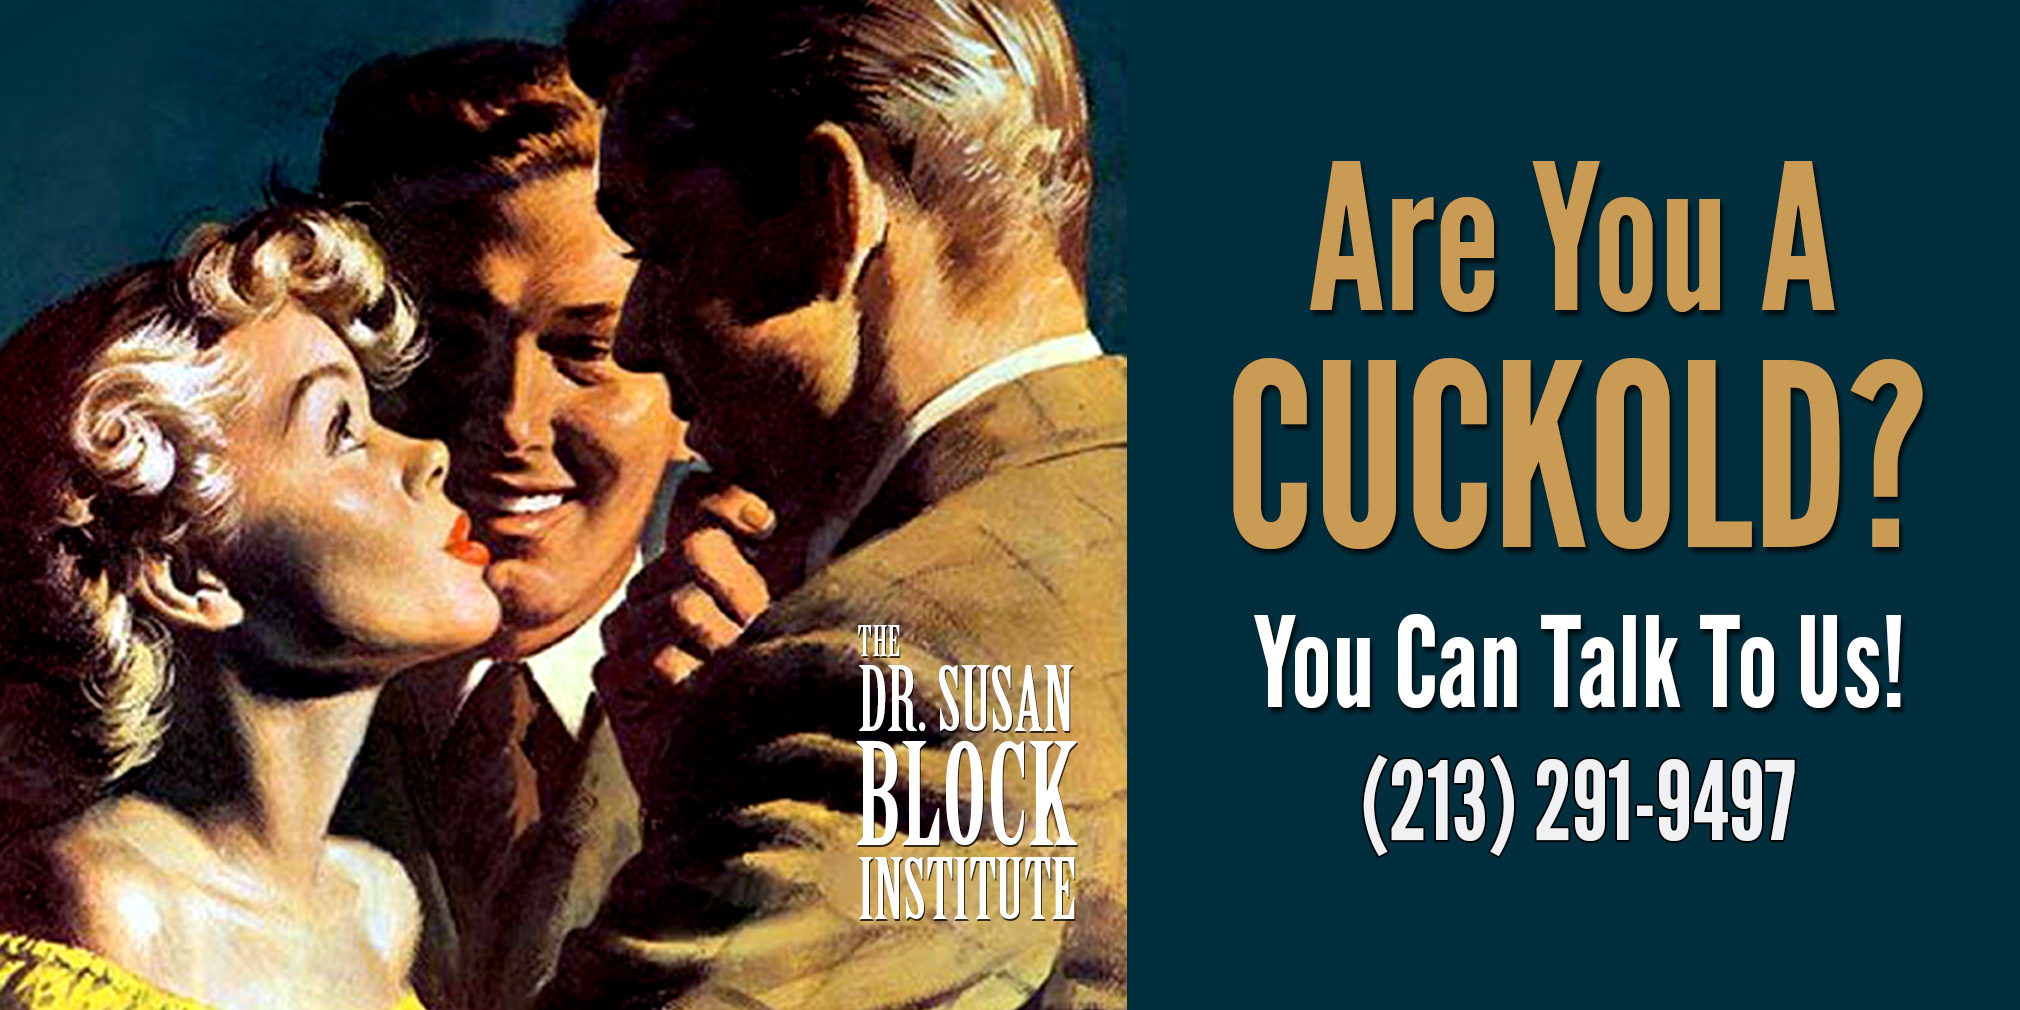 Cuckold quotes